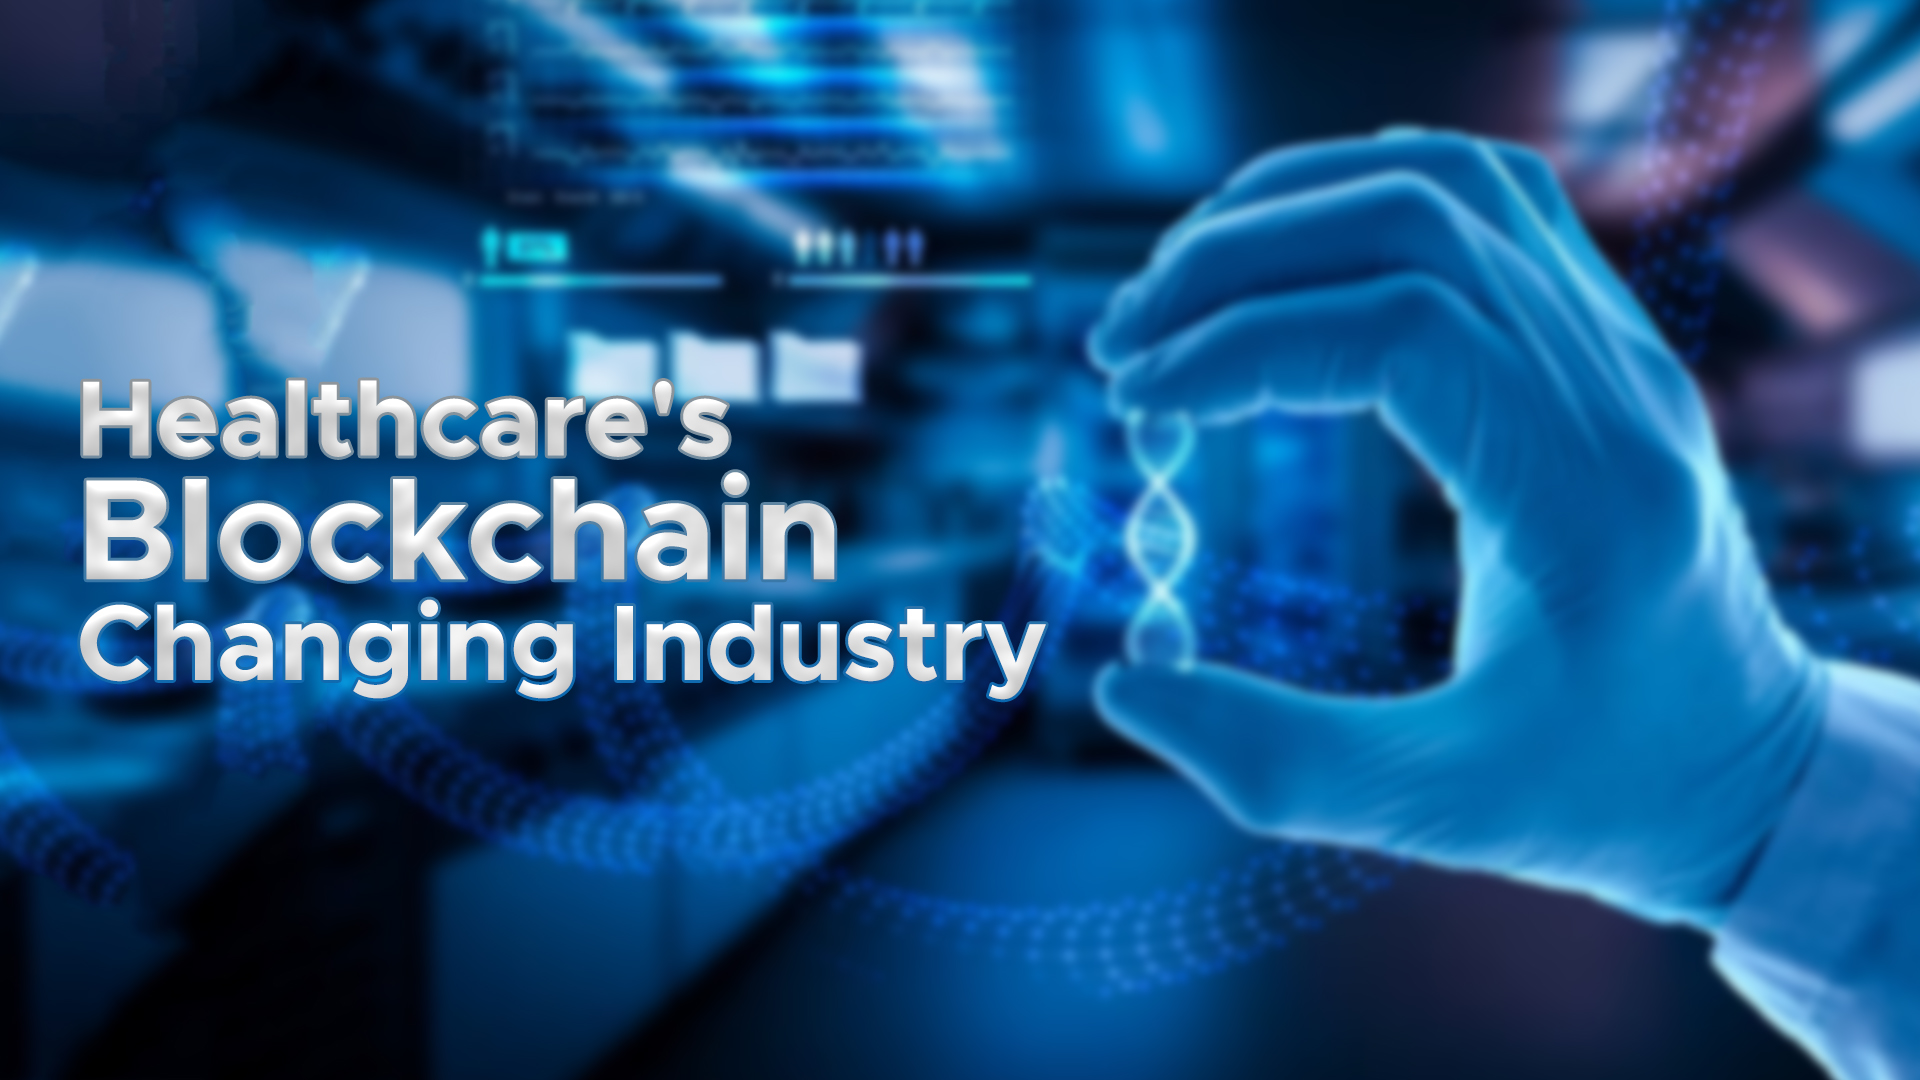 Healthcare's Blockchain Changing Industry with Use Cases